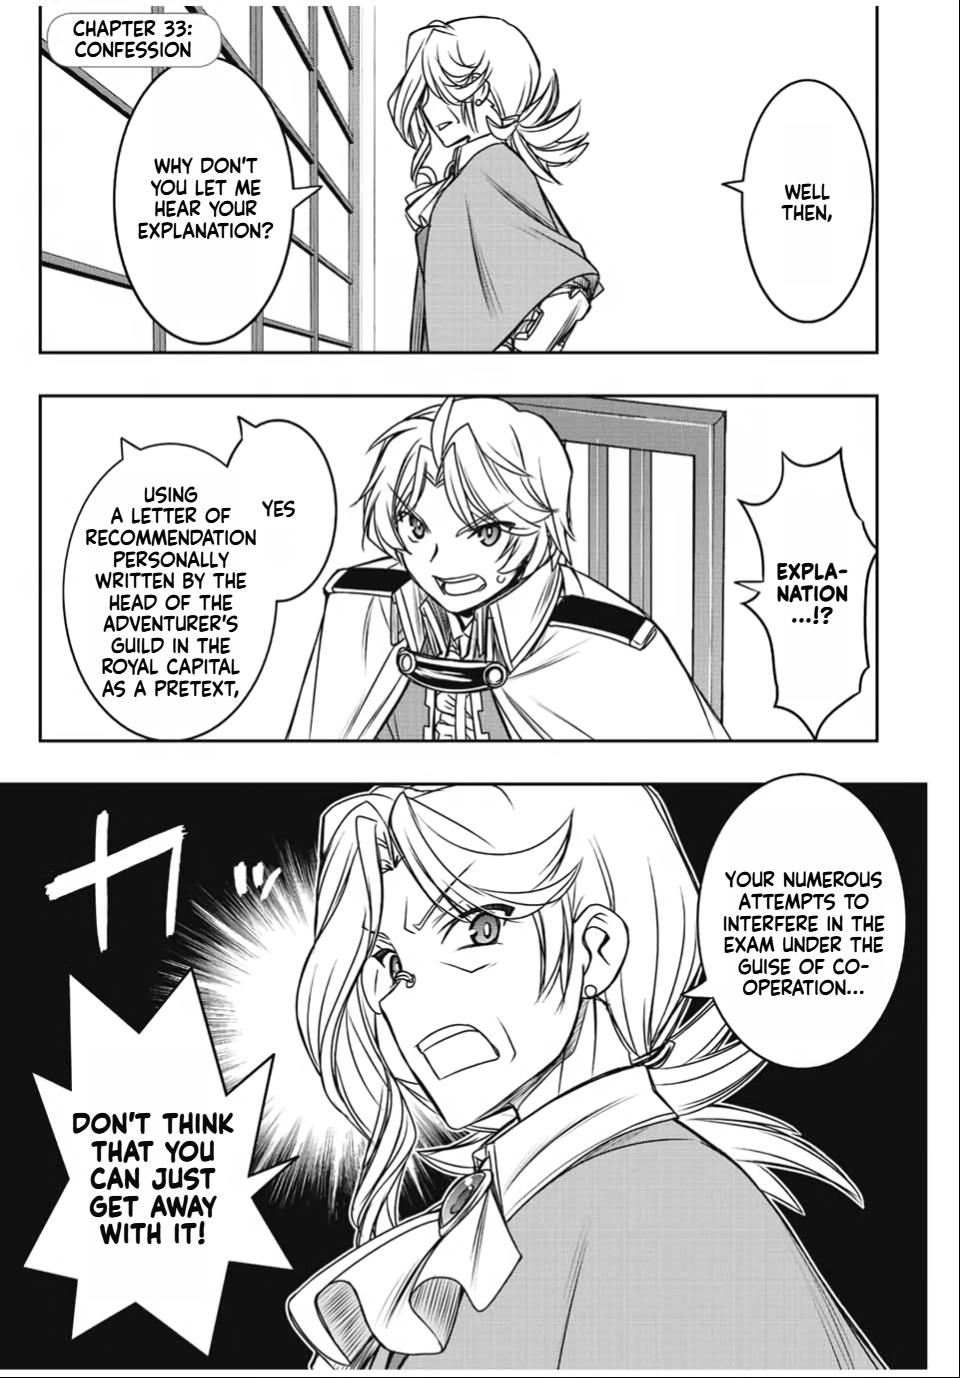 The Useless Skill [Auto Mode] Has Been Awakened ~Huh, Guild's Scout, Didn't You Say I Wasn't Needed Anymore?~ - Page 1